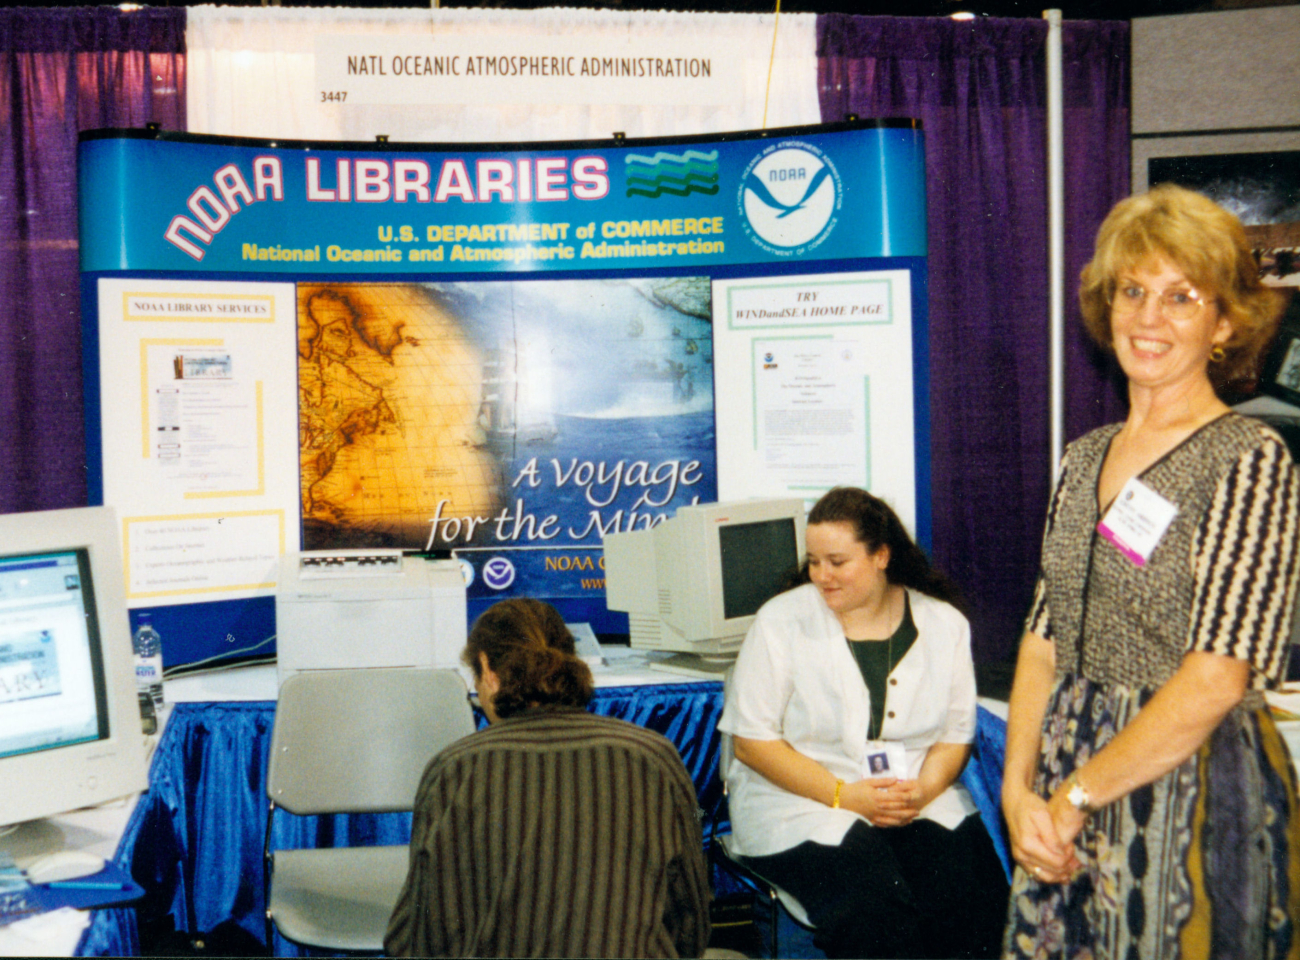 Anna Fiolek - cataloger and ultimately chief cataloger of the NOAA CentralLibrary - sitting, and Dottie Anderson, reference librrarian, standing to theright